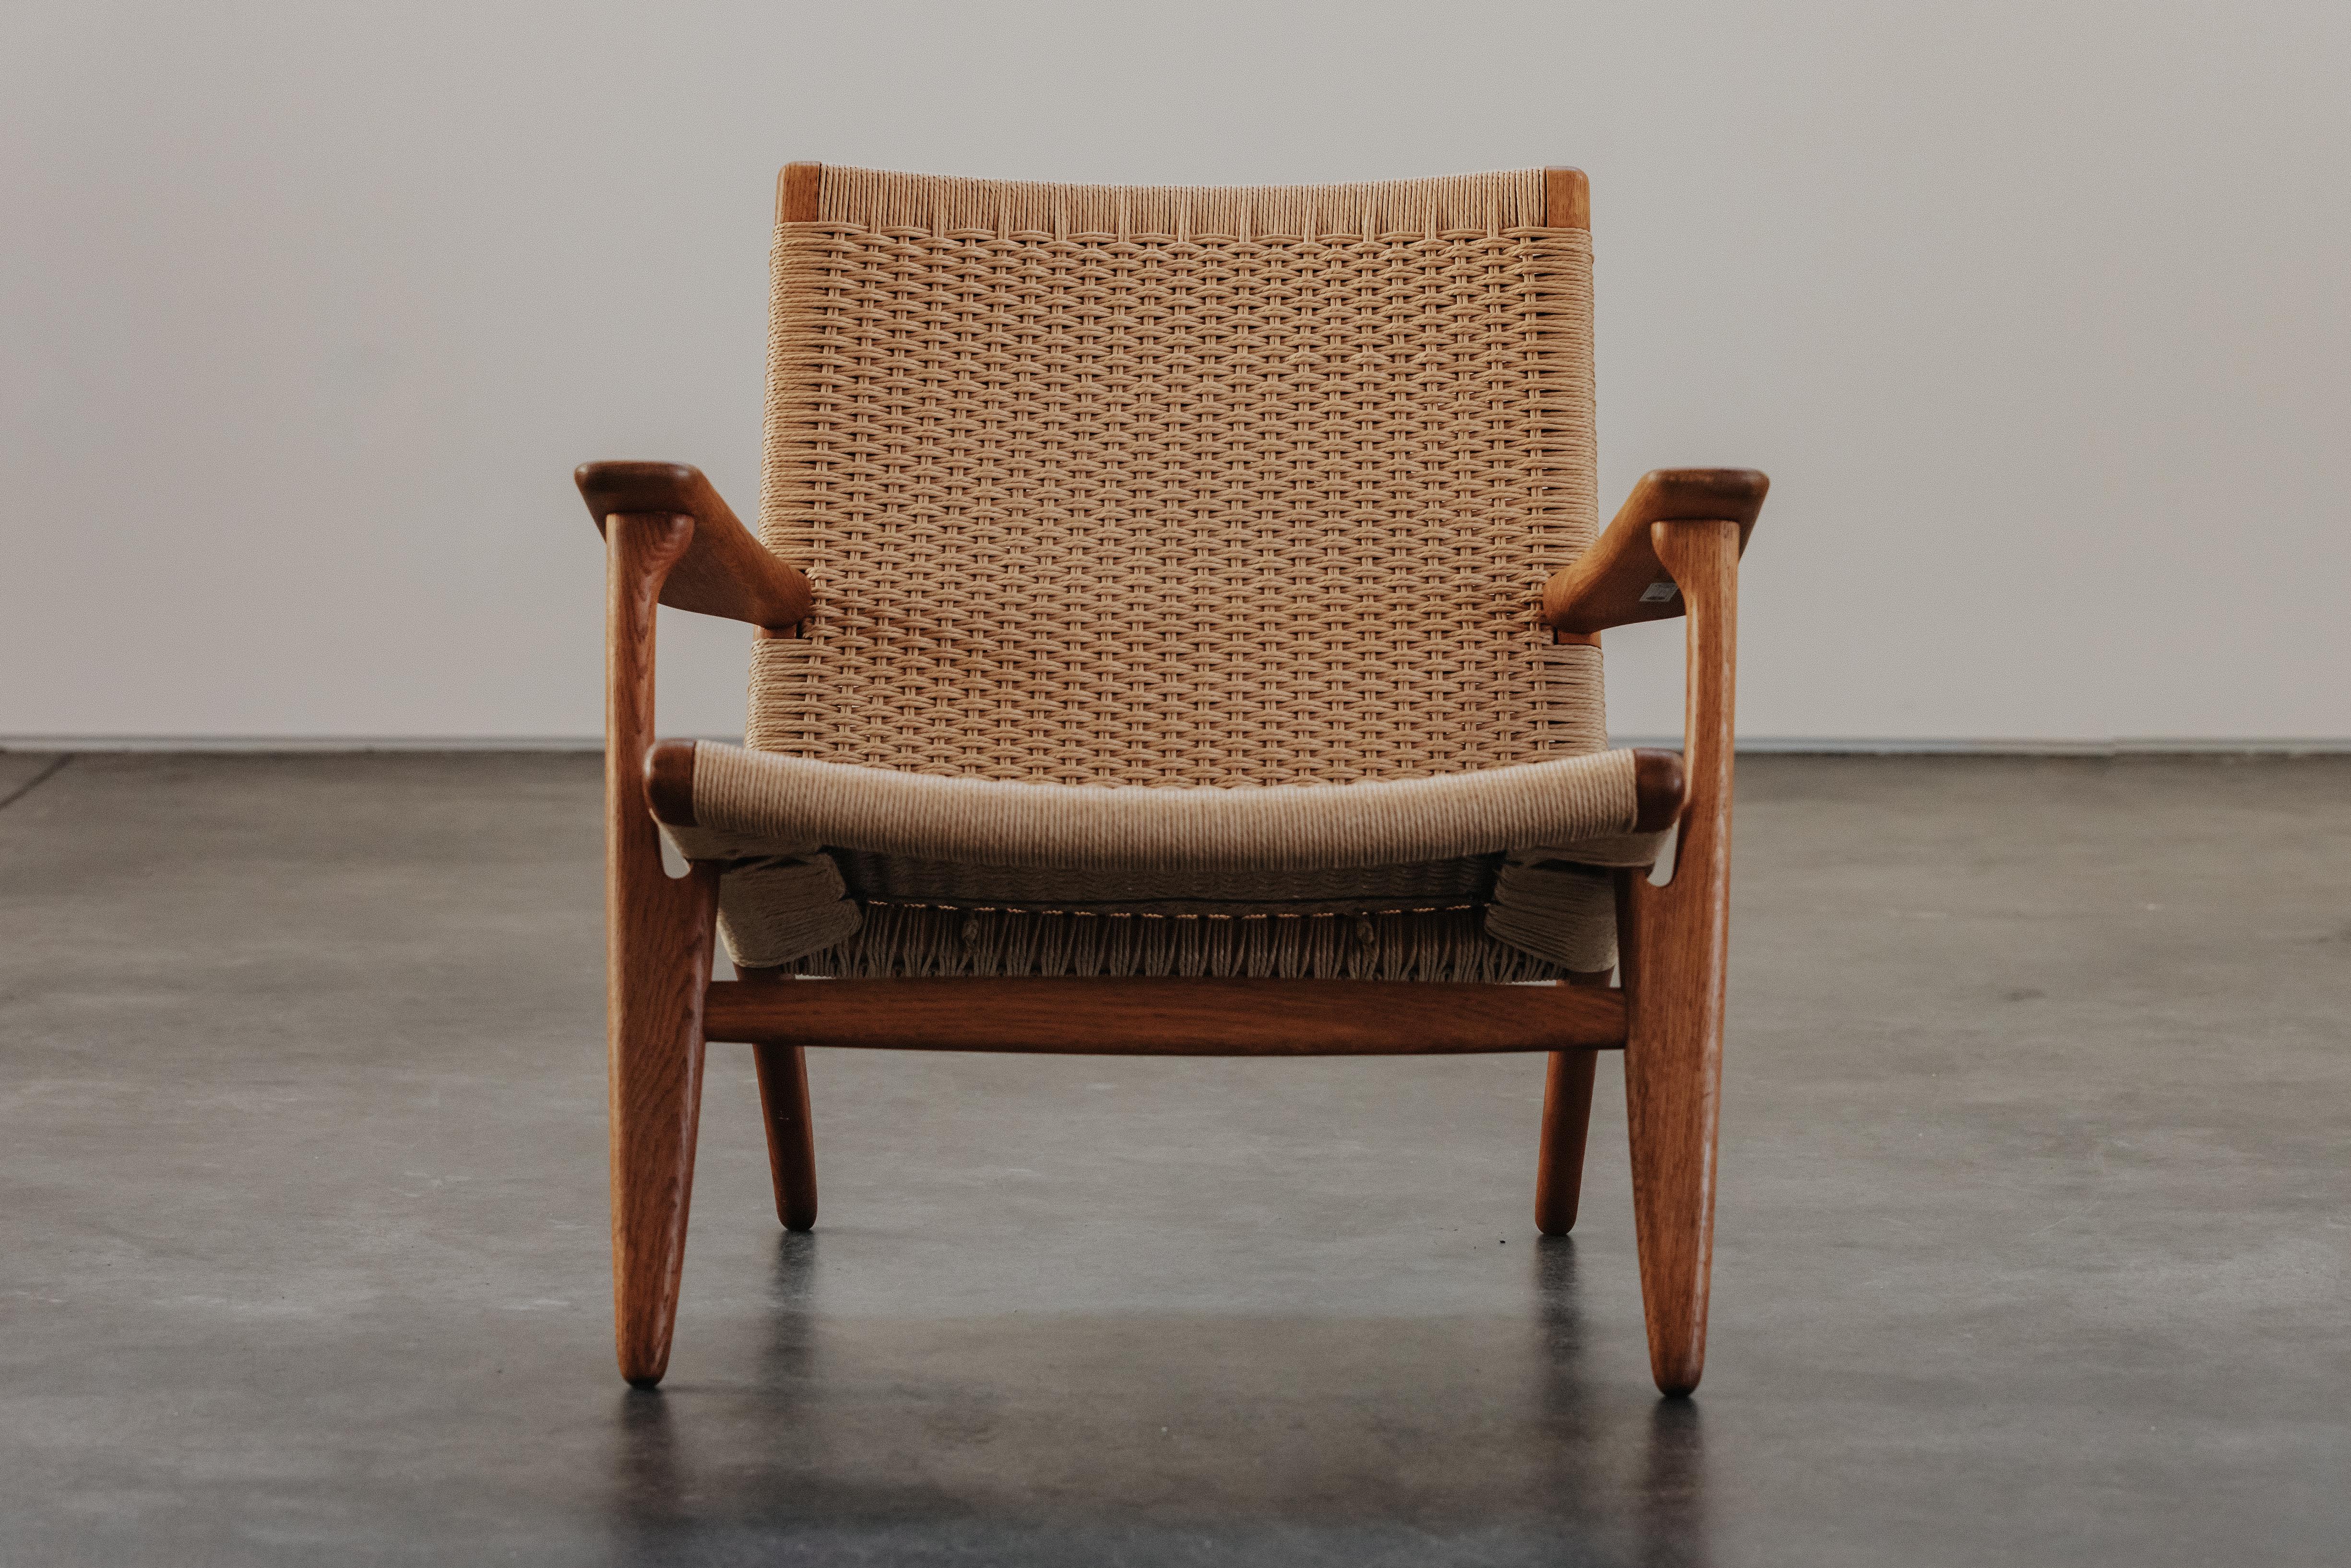 Vintage Hans Wegner Lounge Chair, Model CH25, From Denmark 1970.  Solid oak construction. New papercord.